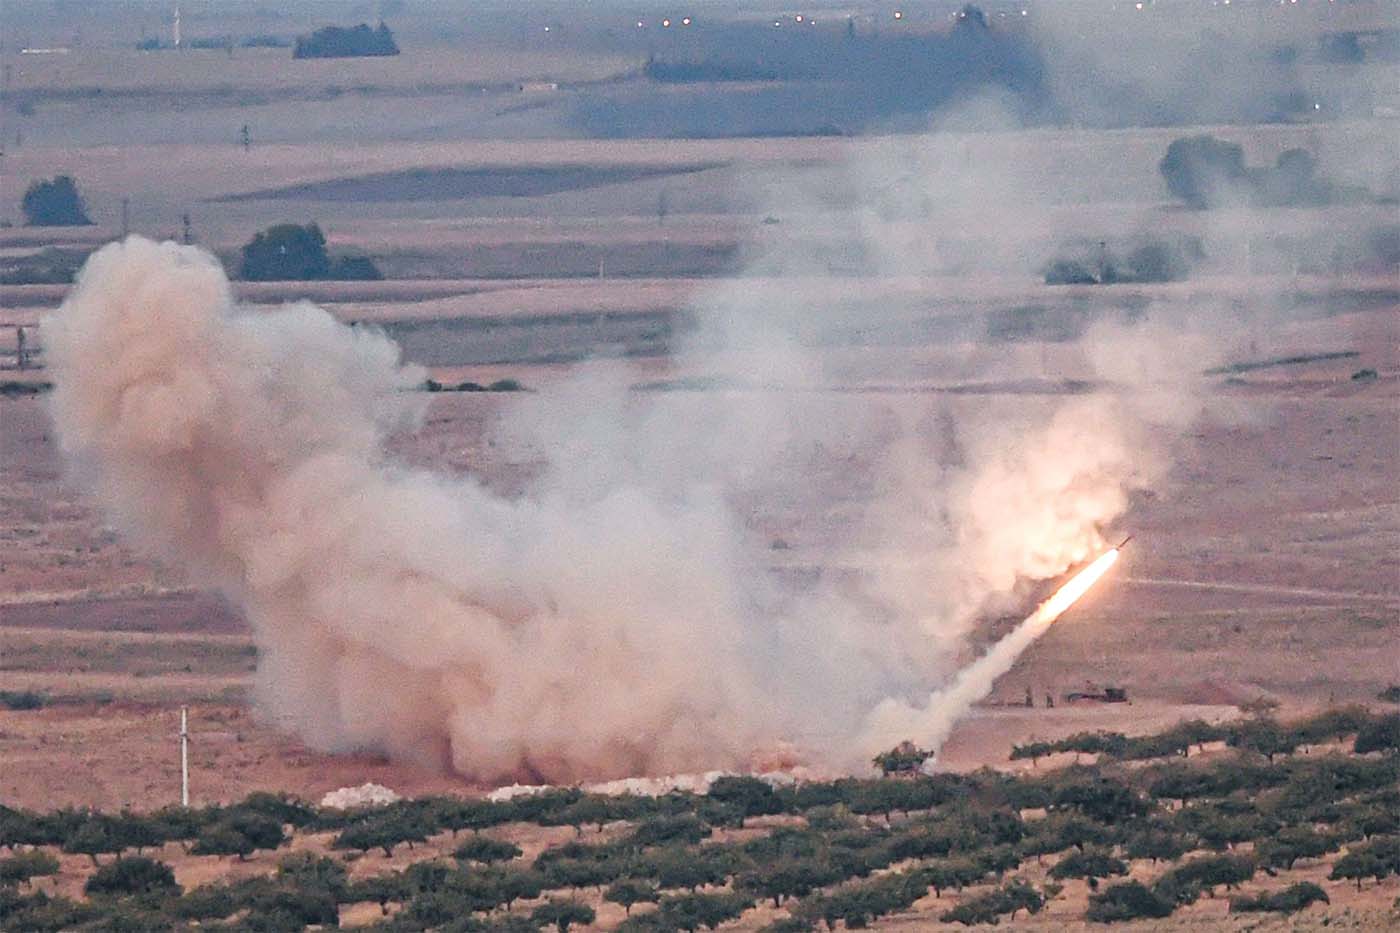 Missile fired by Turkish forces towards the Syrian town of Ras al-Ain